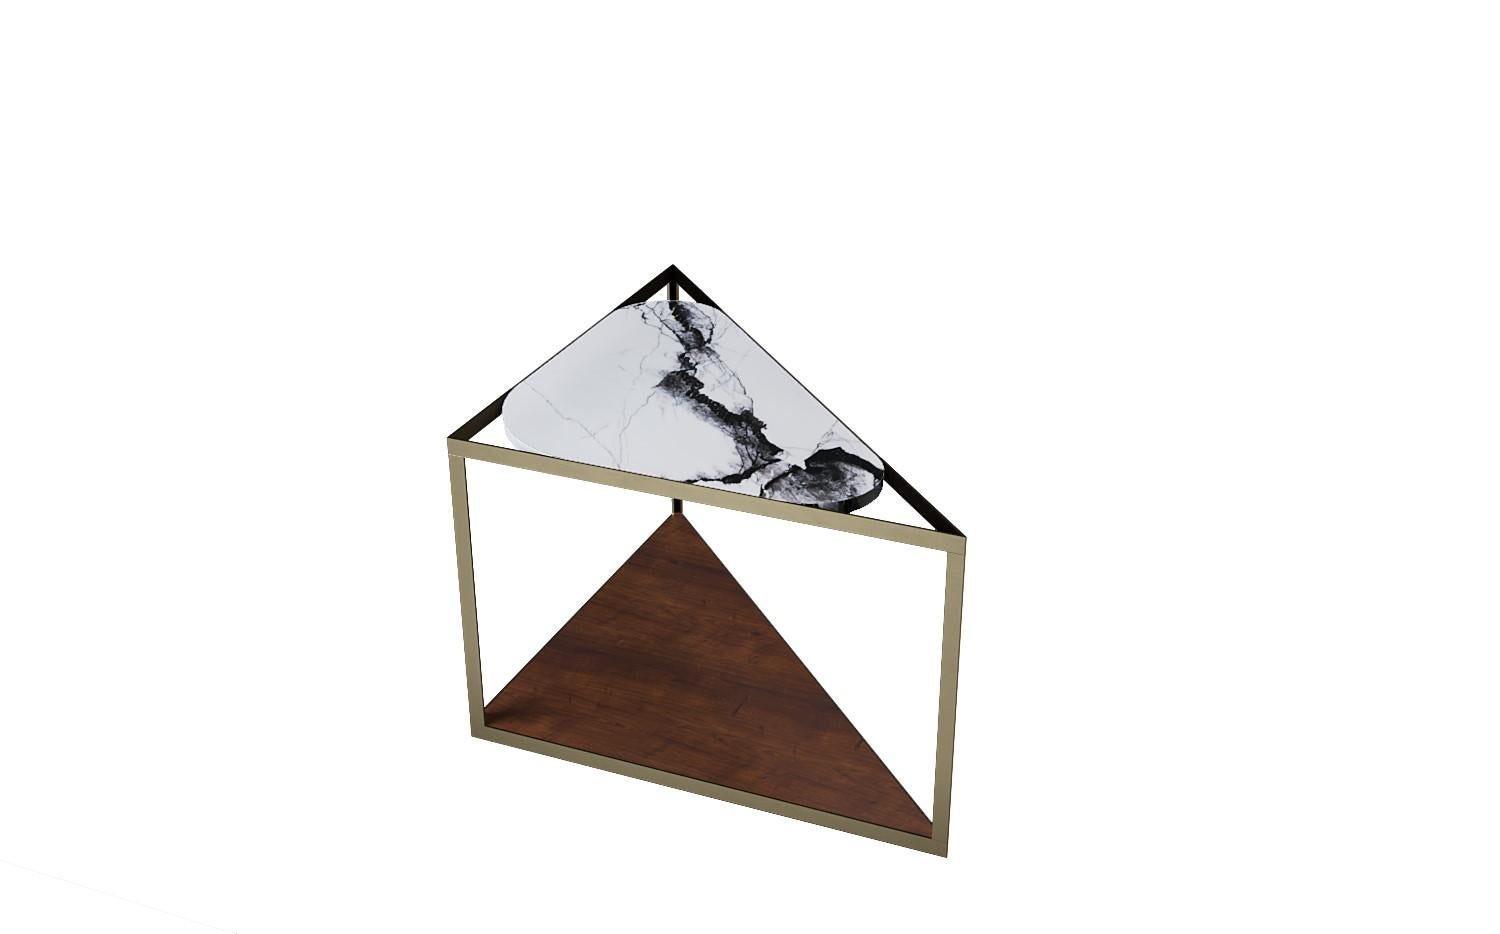 𝗣𝗿𝗼𝗱𝘂𝗰𝘁 𝗗𝗲𝘁𝗮𝗶𝗹𝘀:
NORDST GAARD Coffee Table from Italian Black Eagle Marble, Danish Modern Design, New

The triangular shape of this GAARD table makes it practical and highly versatile for living room spaces. Standing alone, it can be